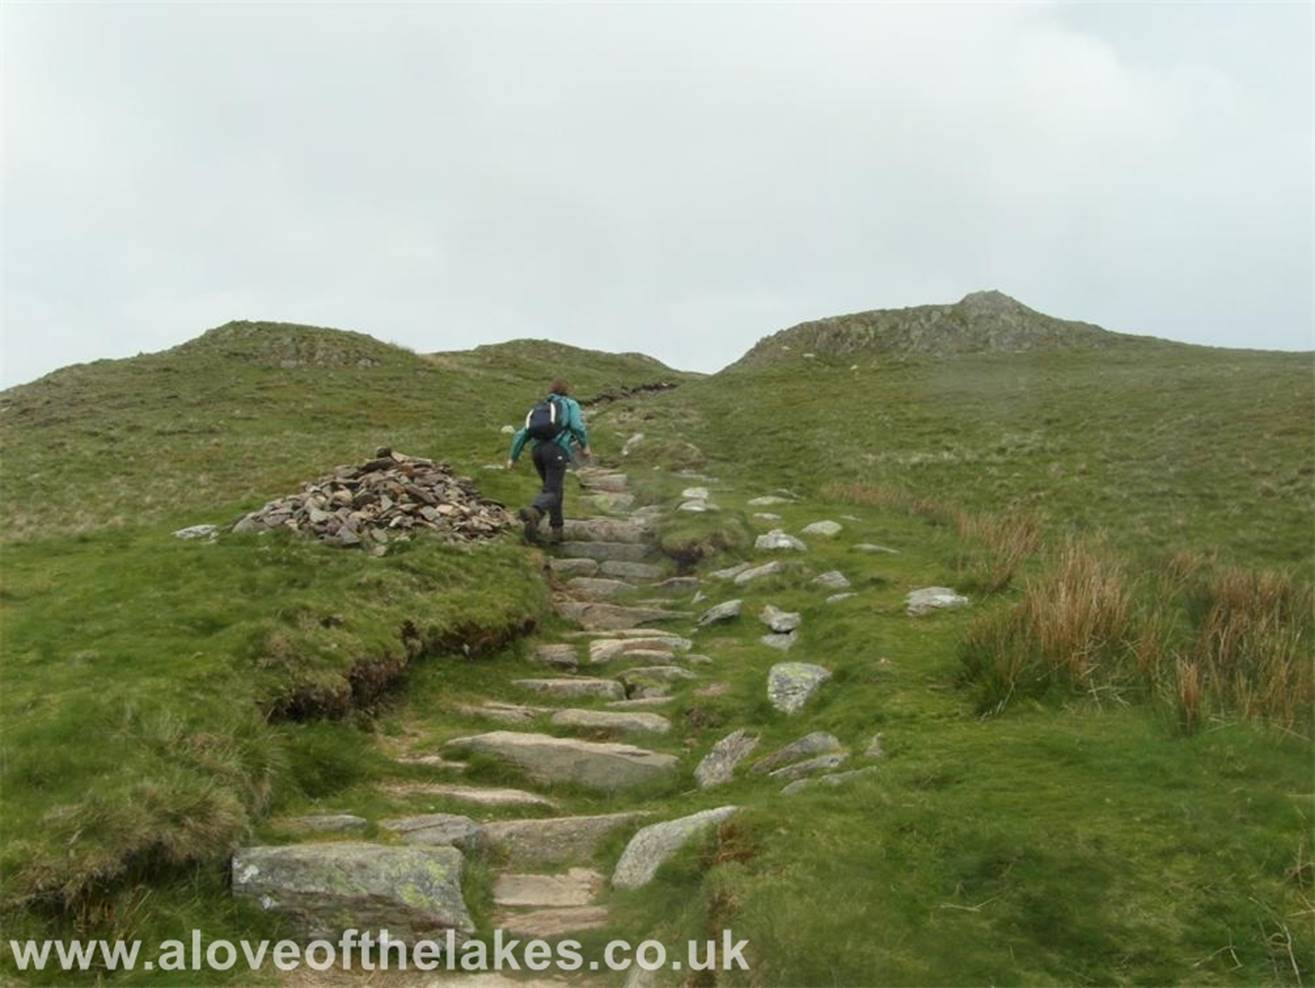 At Boredale Hause the path turns back on itself and steepens as it leads towards the summit